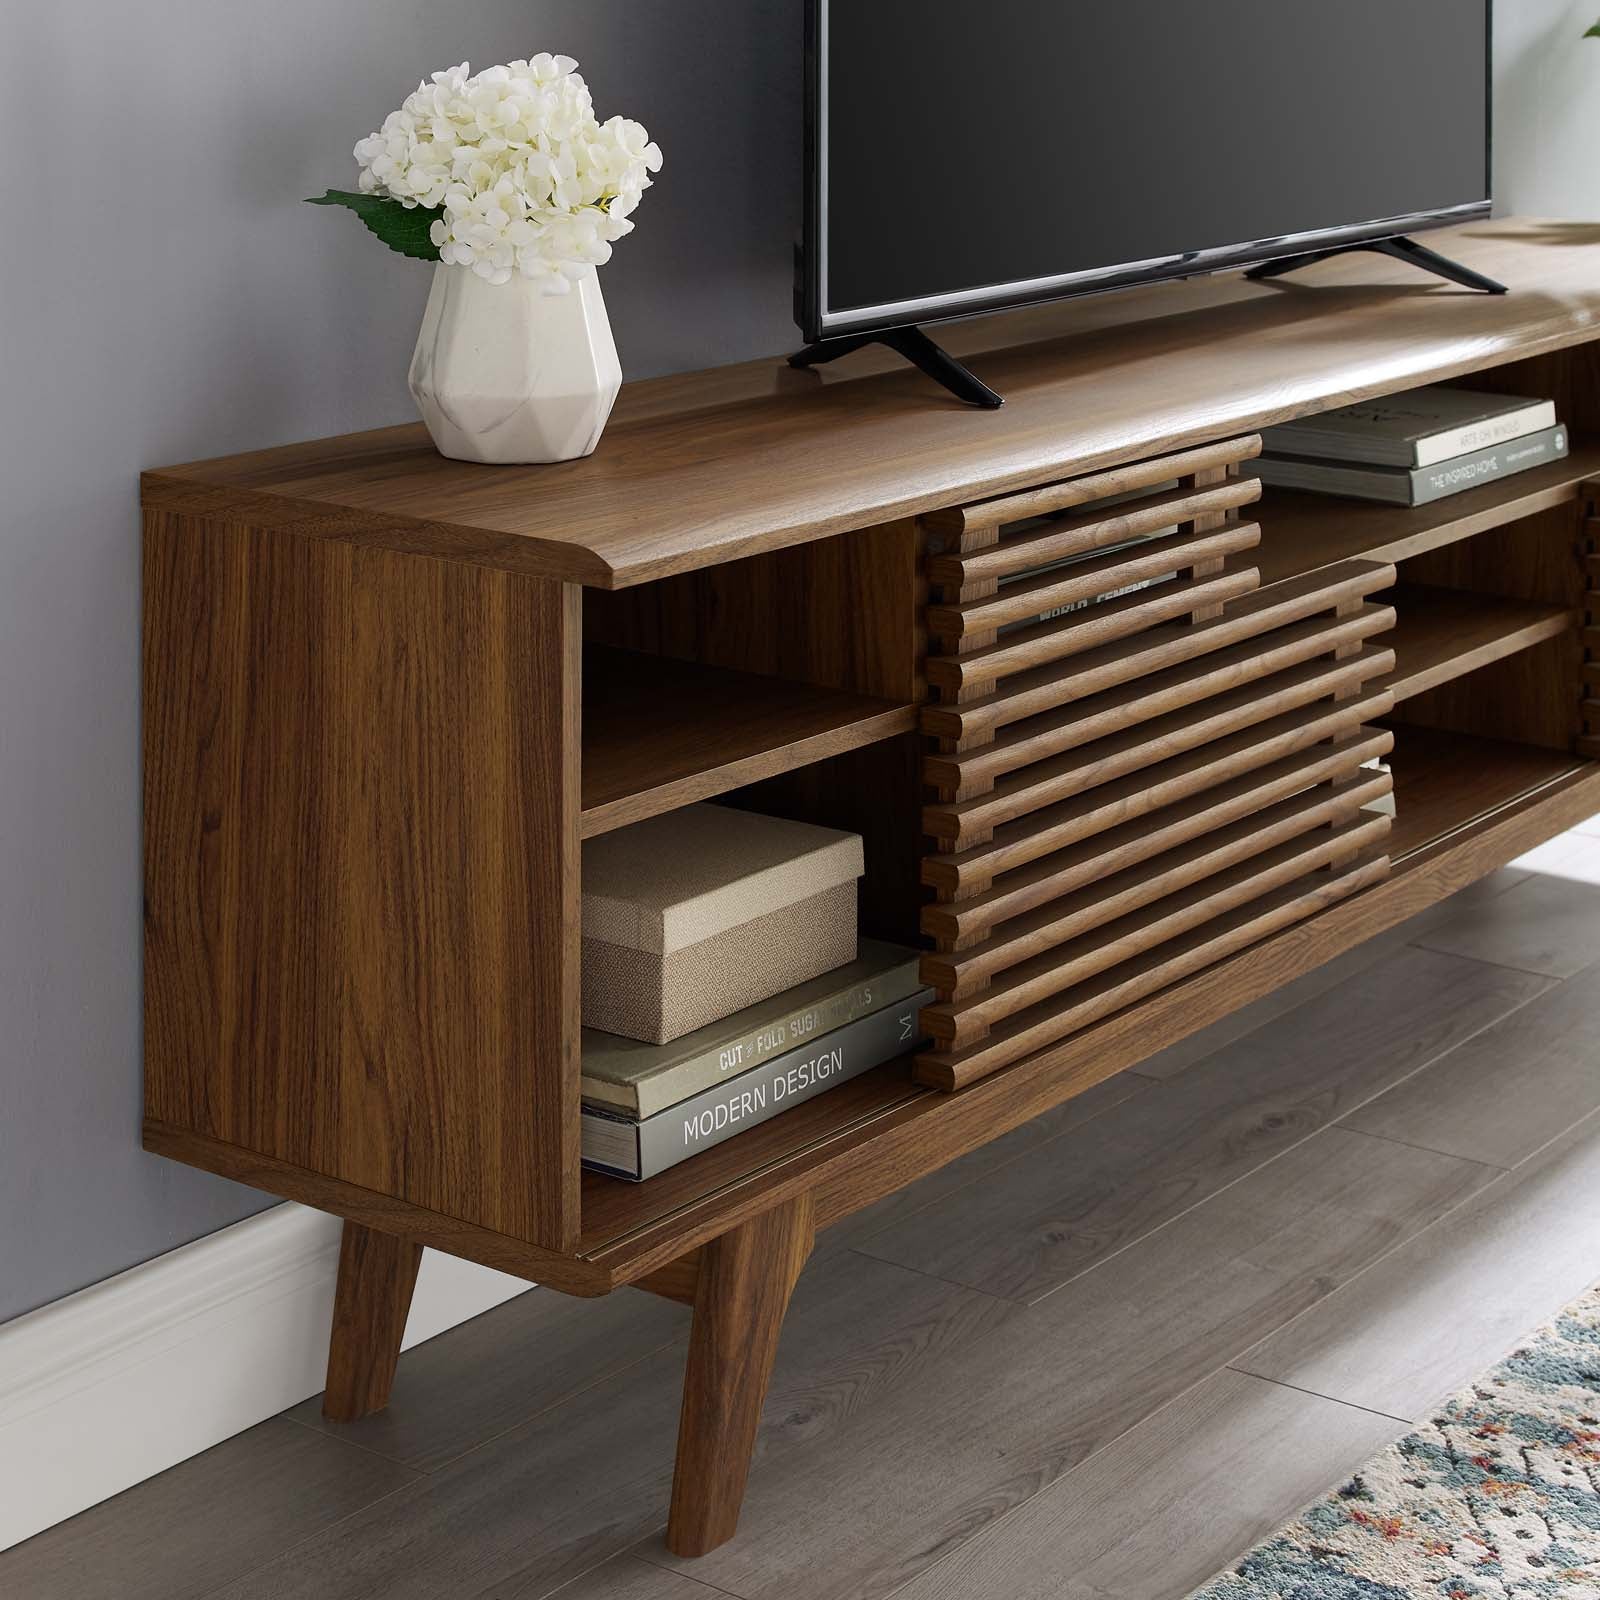 Render 71" Media Console TV Stand - East Shore Modern Home Furnishings